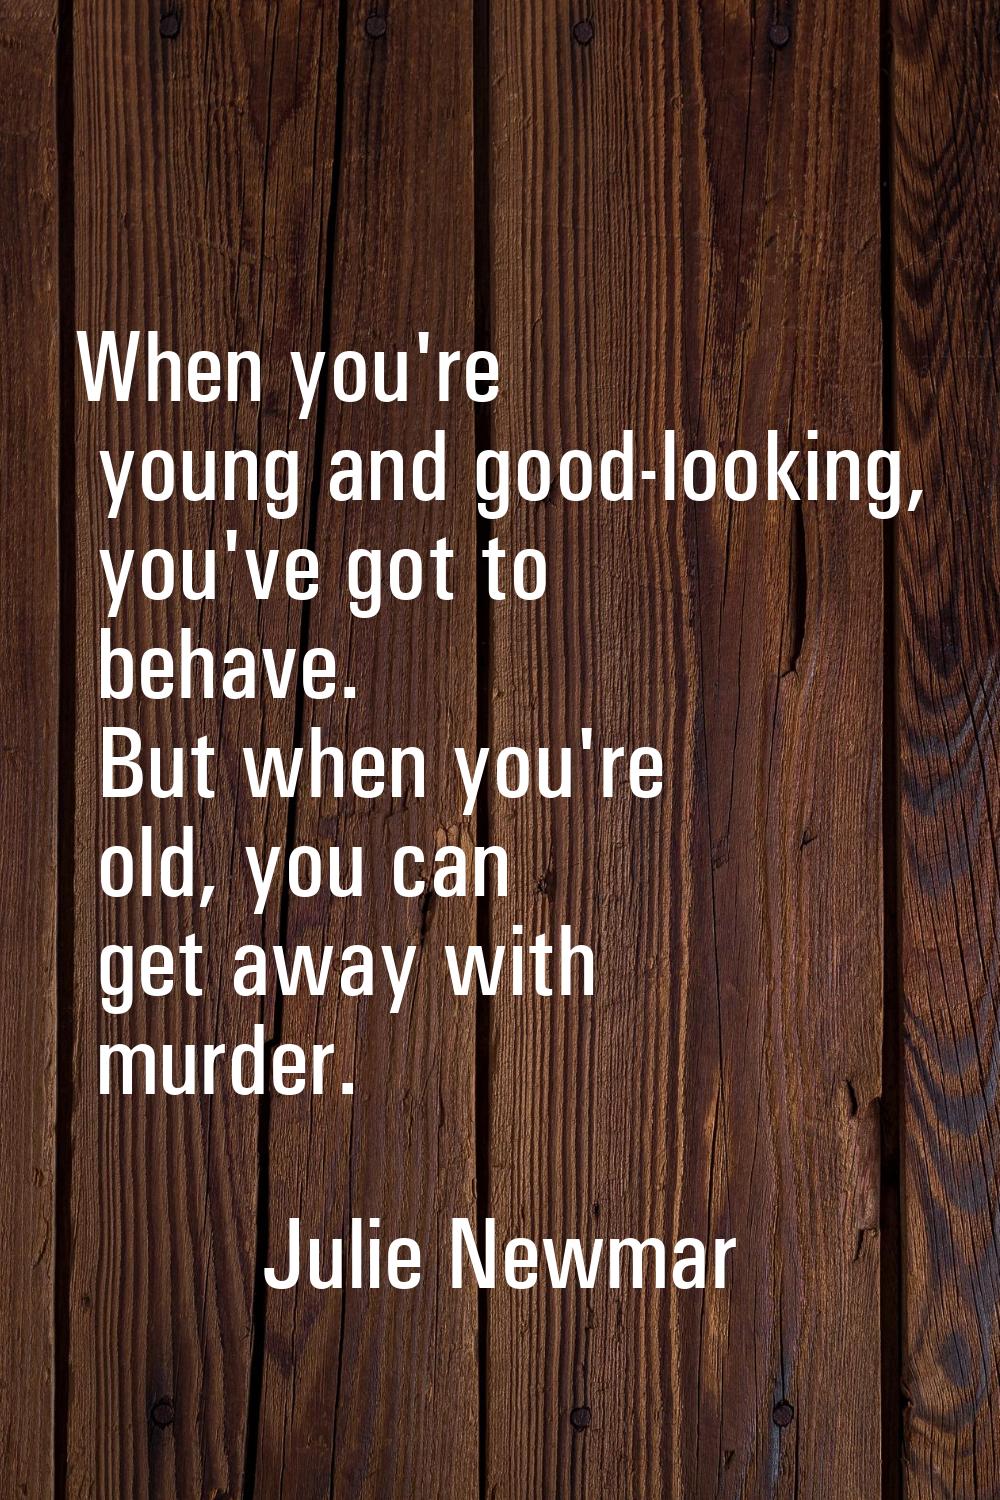 When you're young and good-looking, you've got to behave. But when you're old, you can get away wit